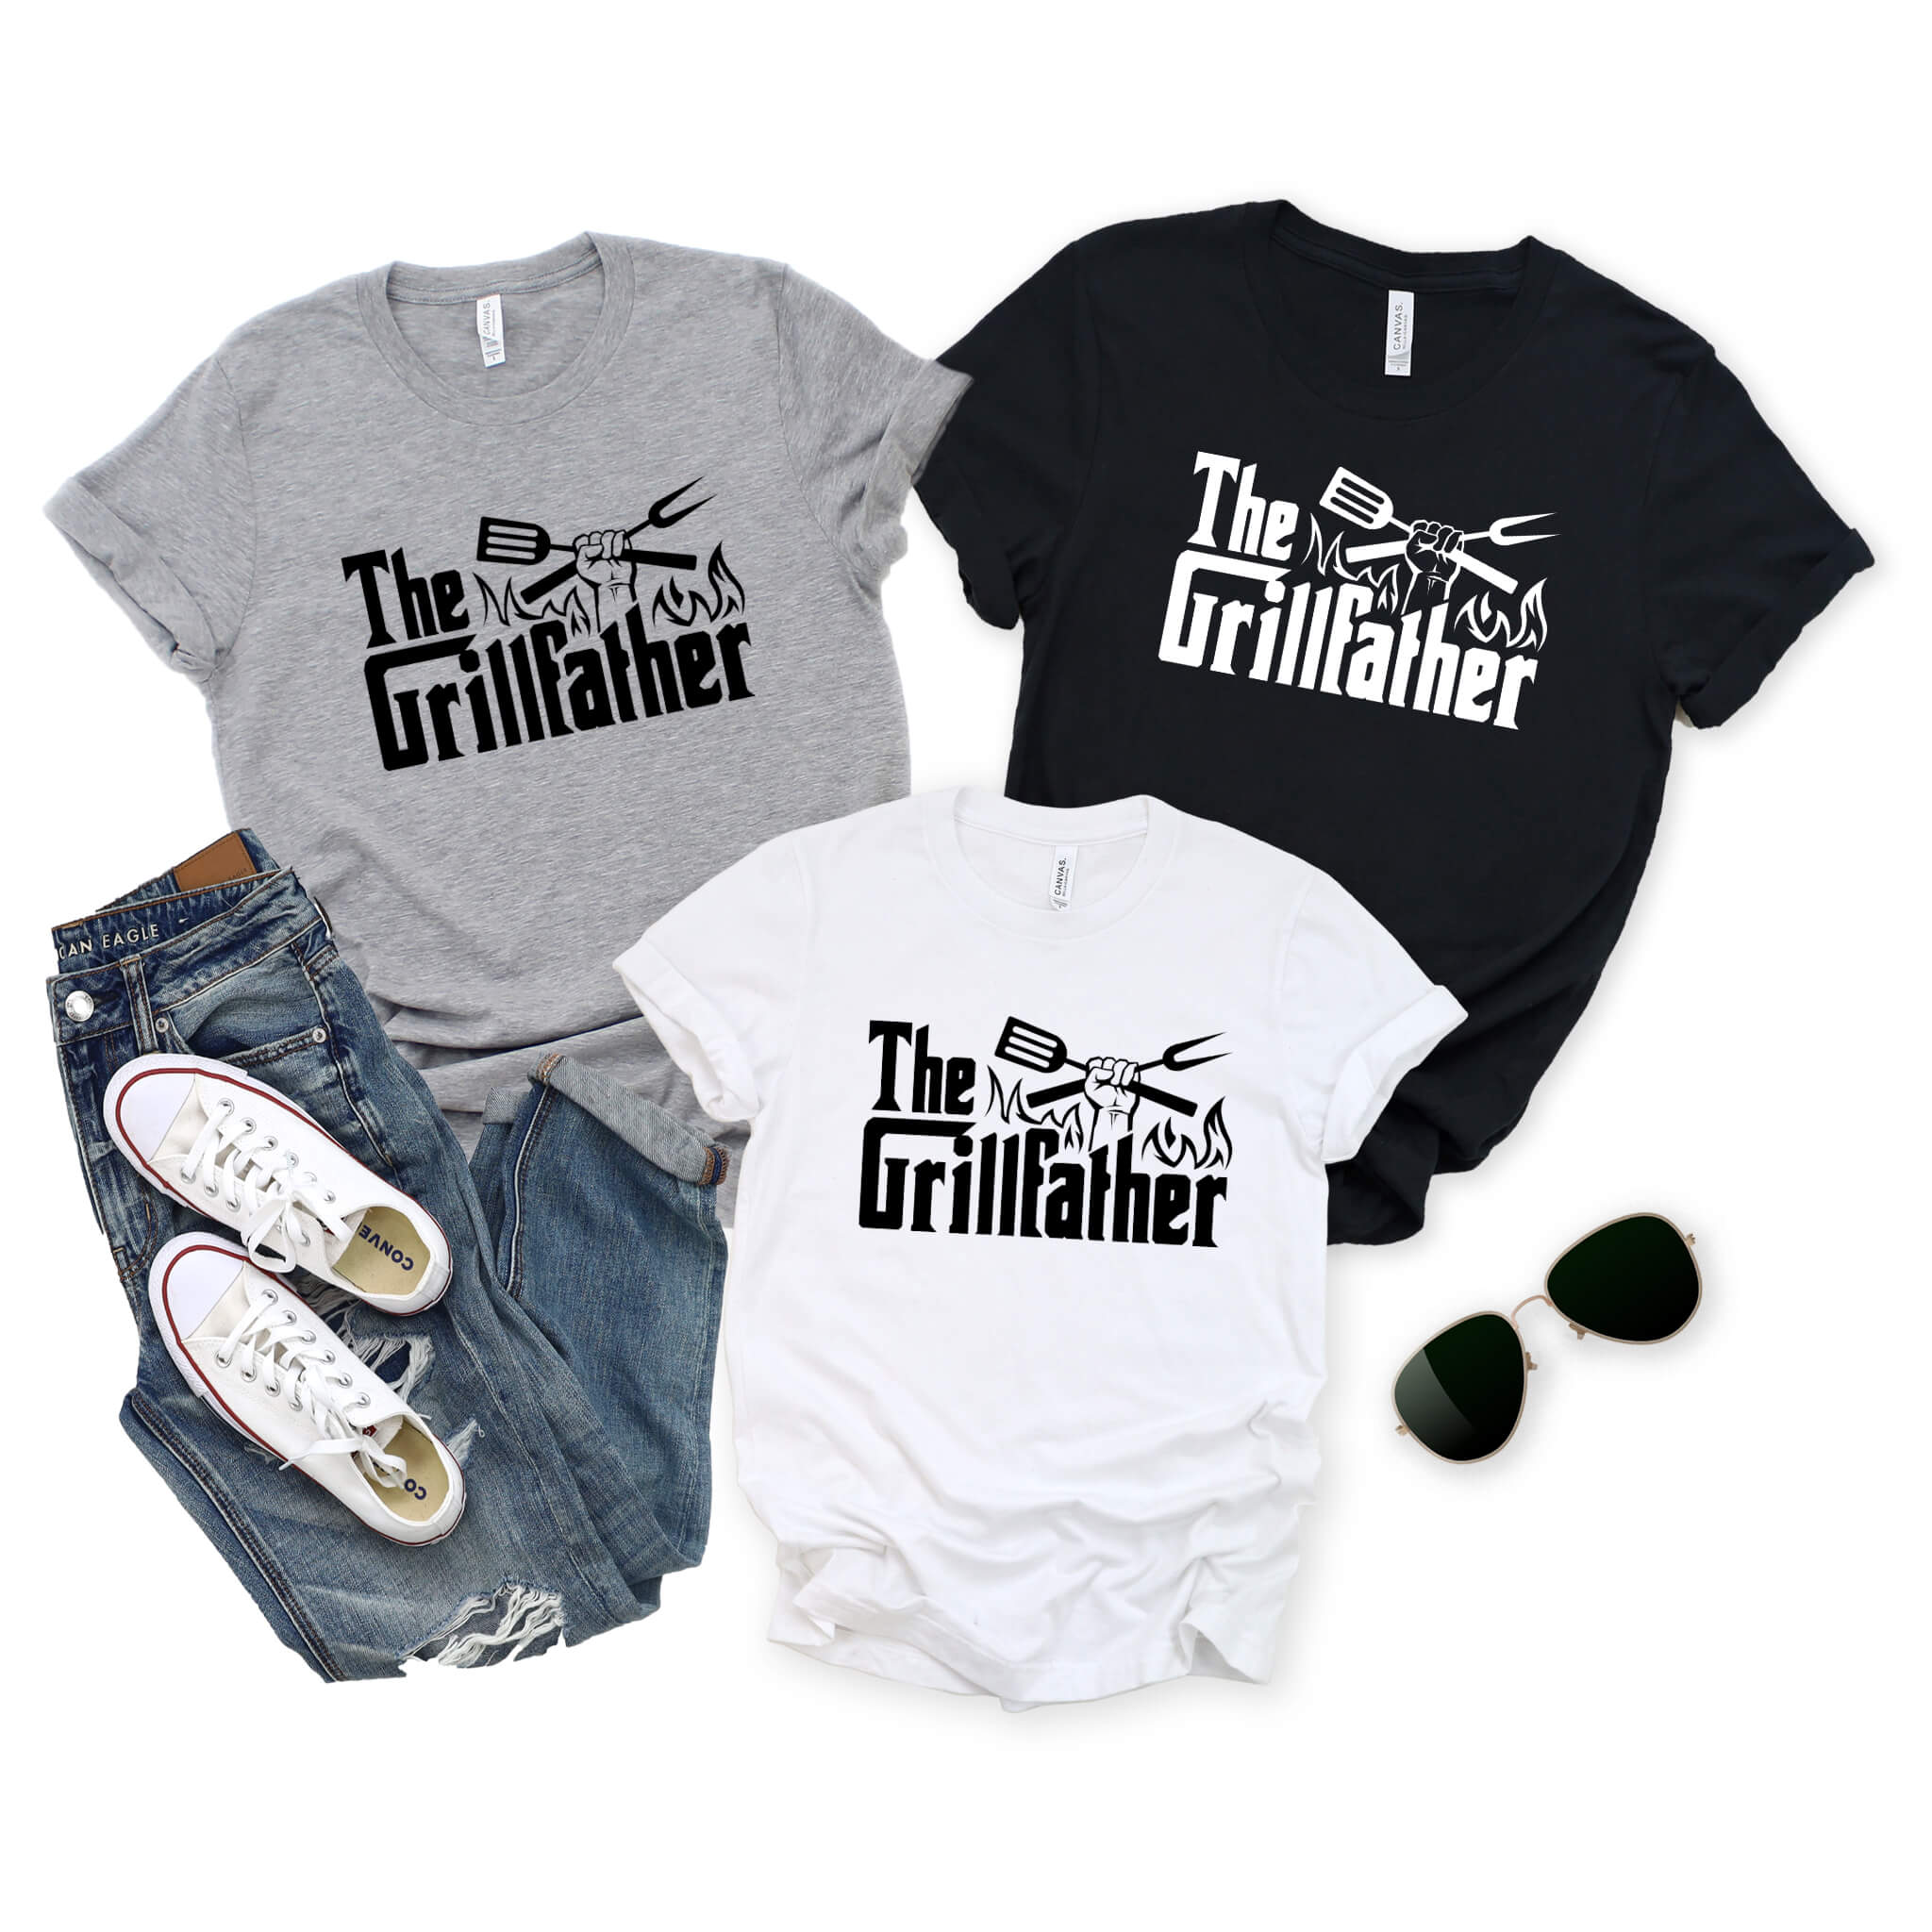 The Grillfather T-Shirt Guys Men's Birthday Christmas Father's Day Gift